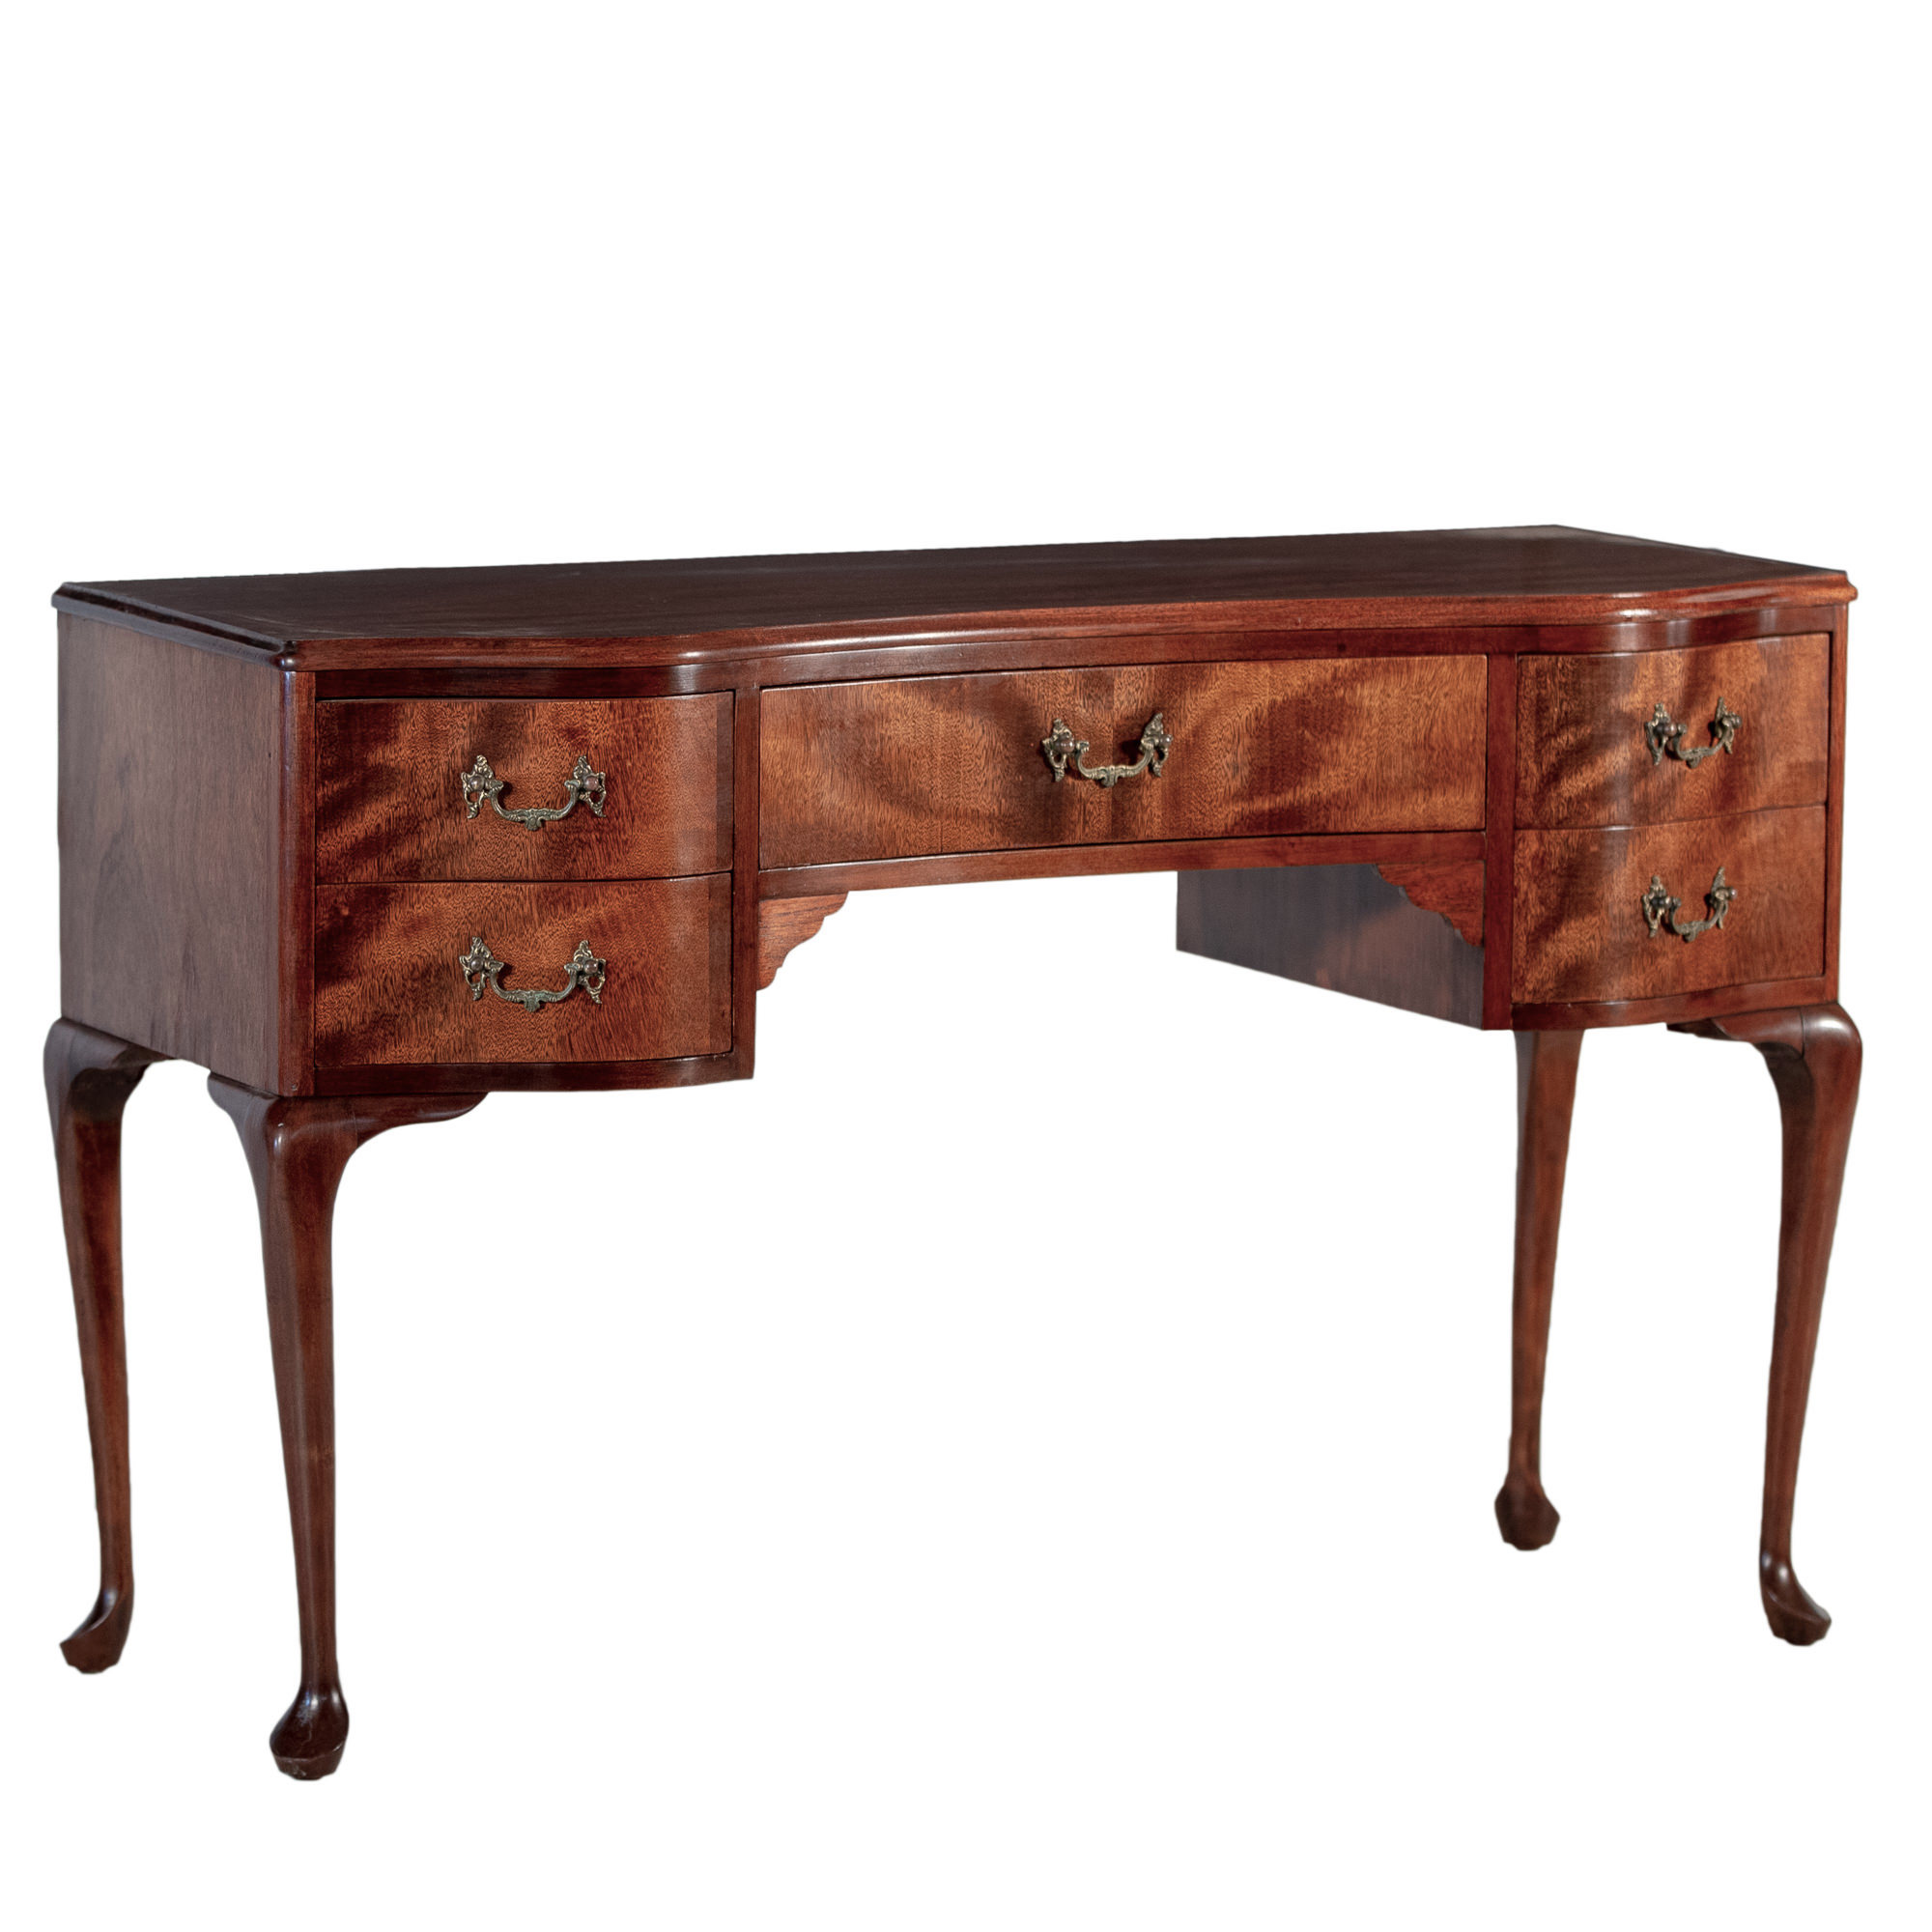 'Queensland Maple Dressing Table with Queen Anne Cabriole Legs Circa 1930s'